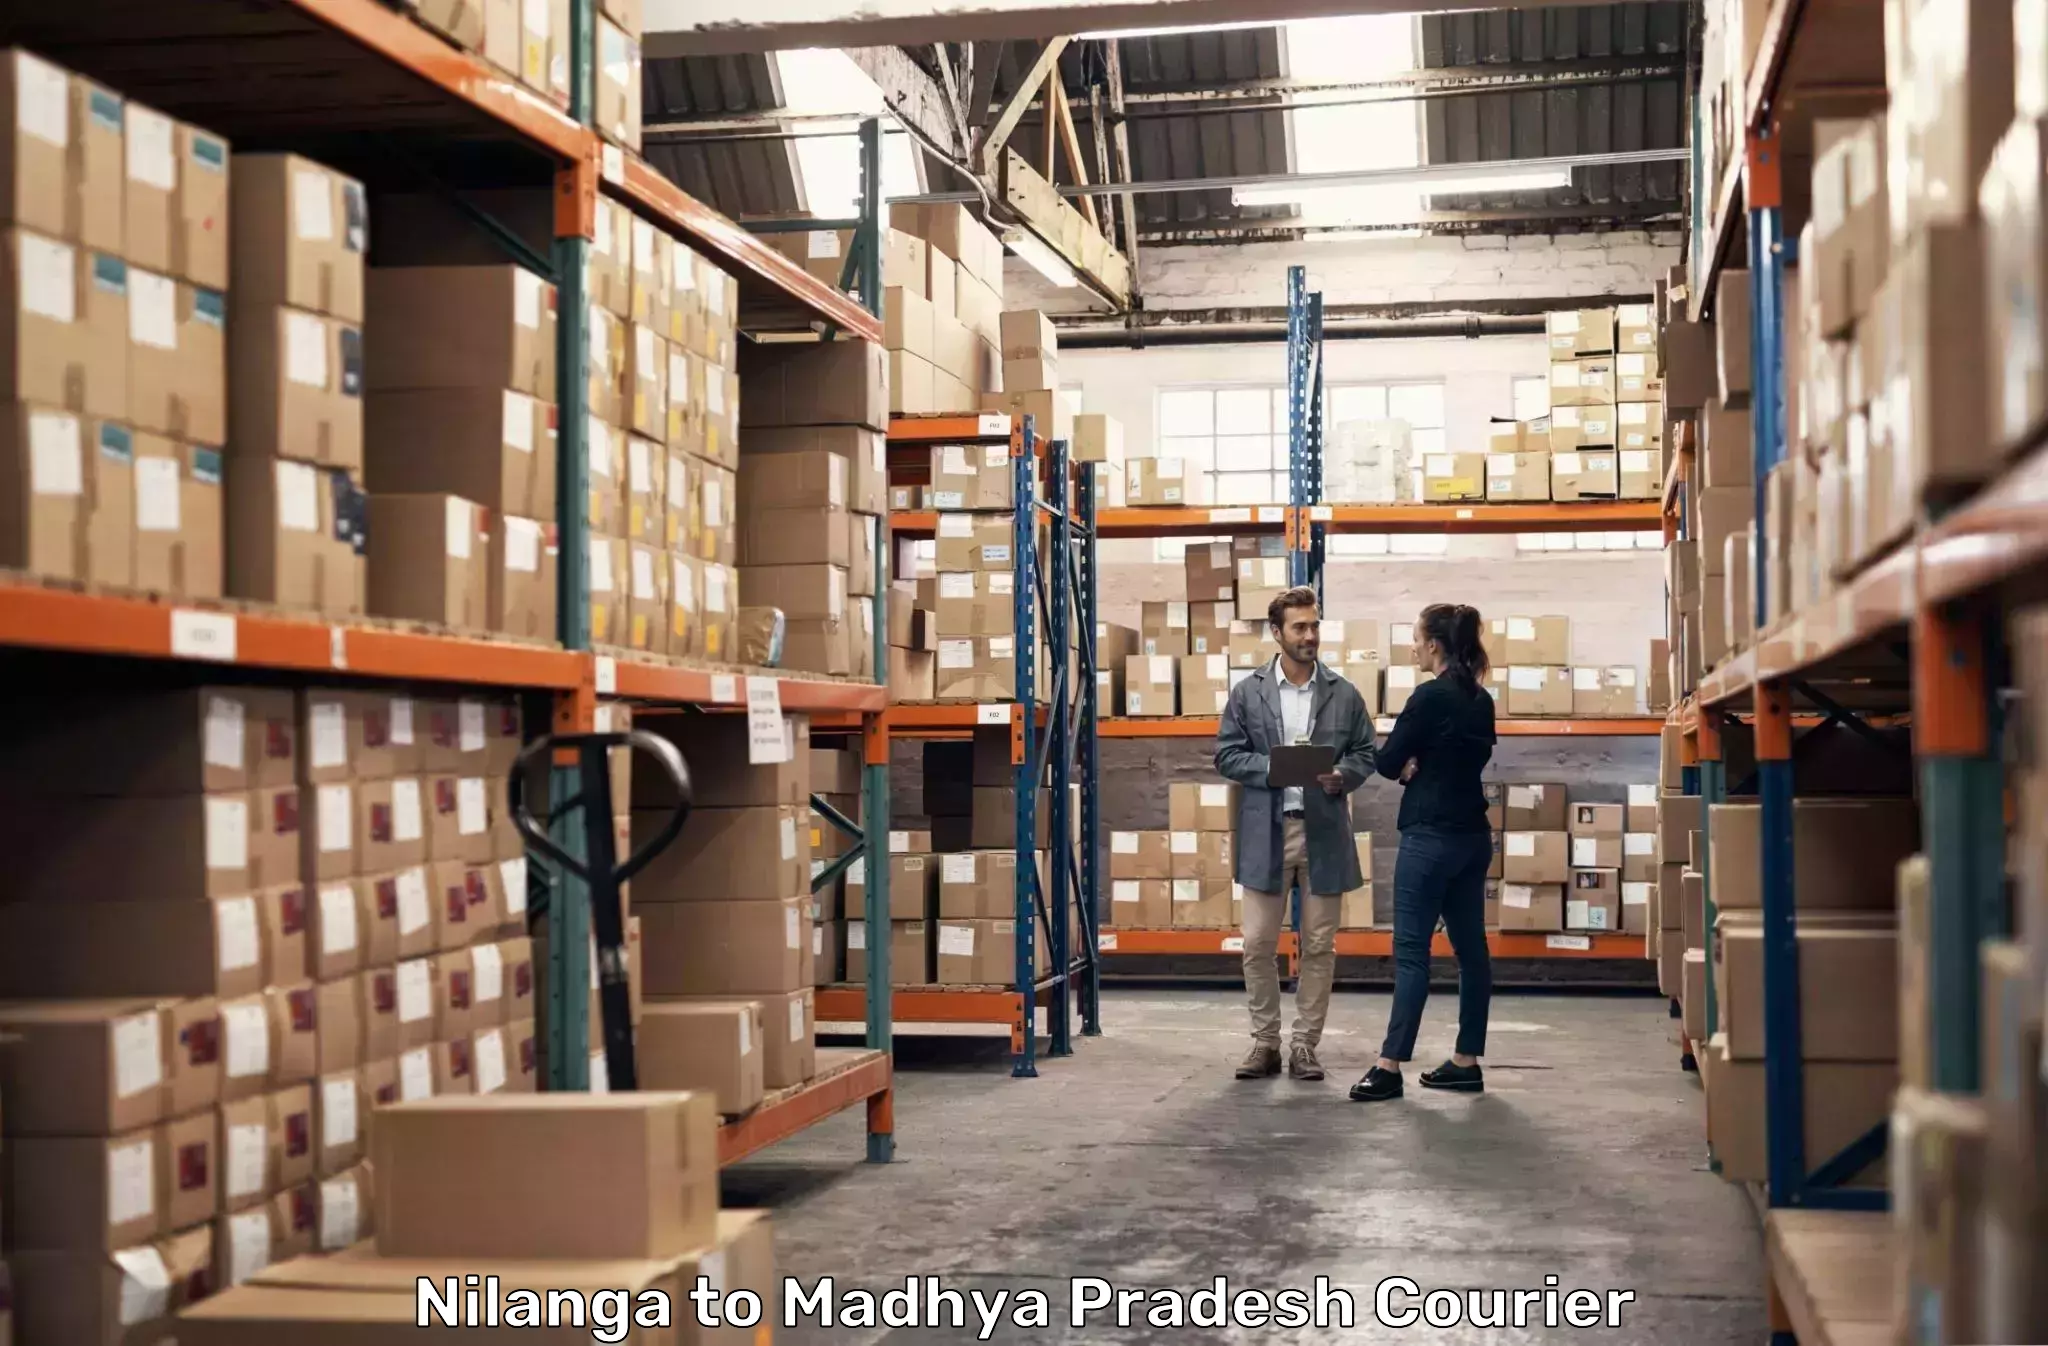 State-of-the-art courier technology Nilanga to Chanderi